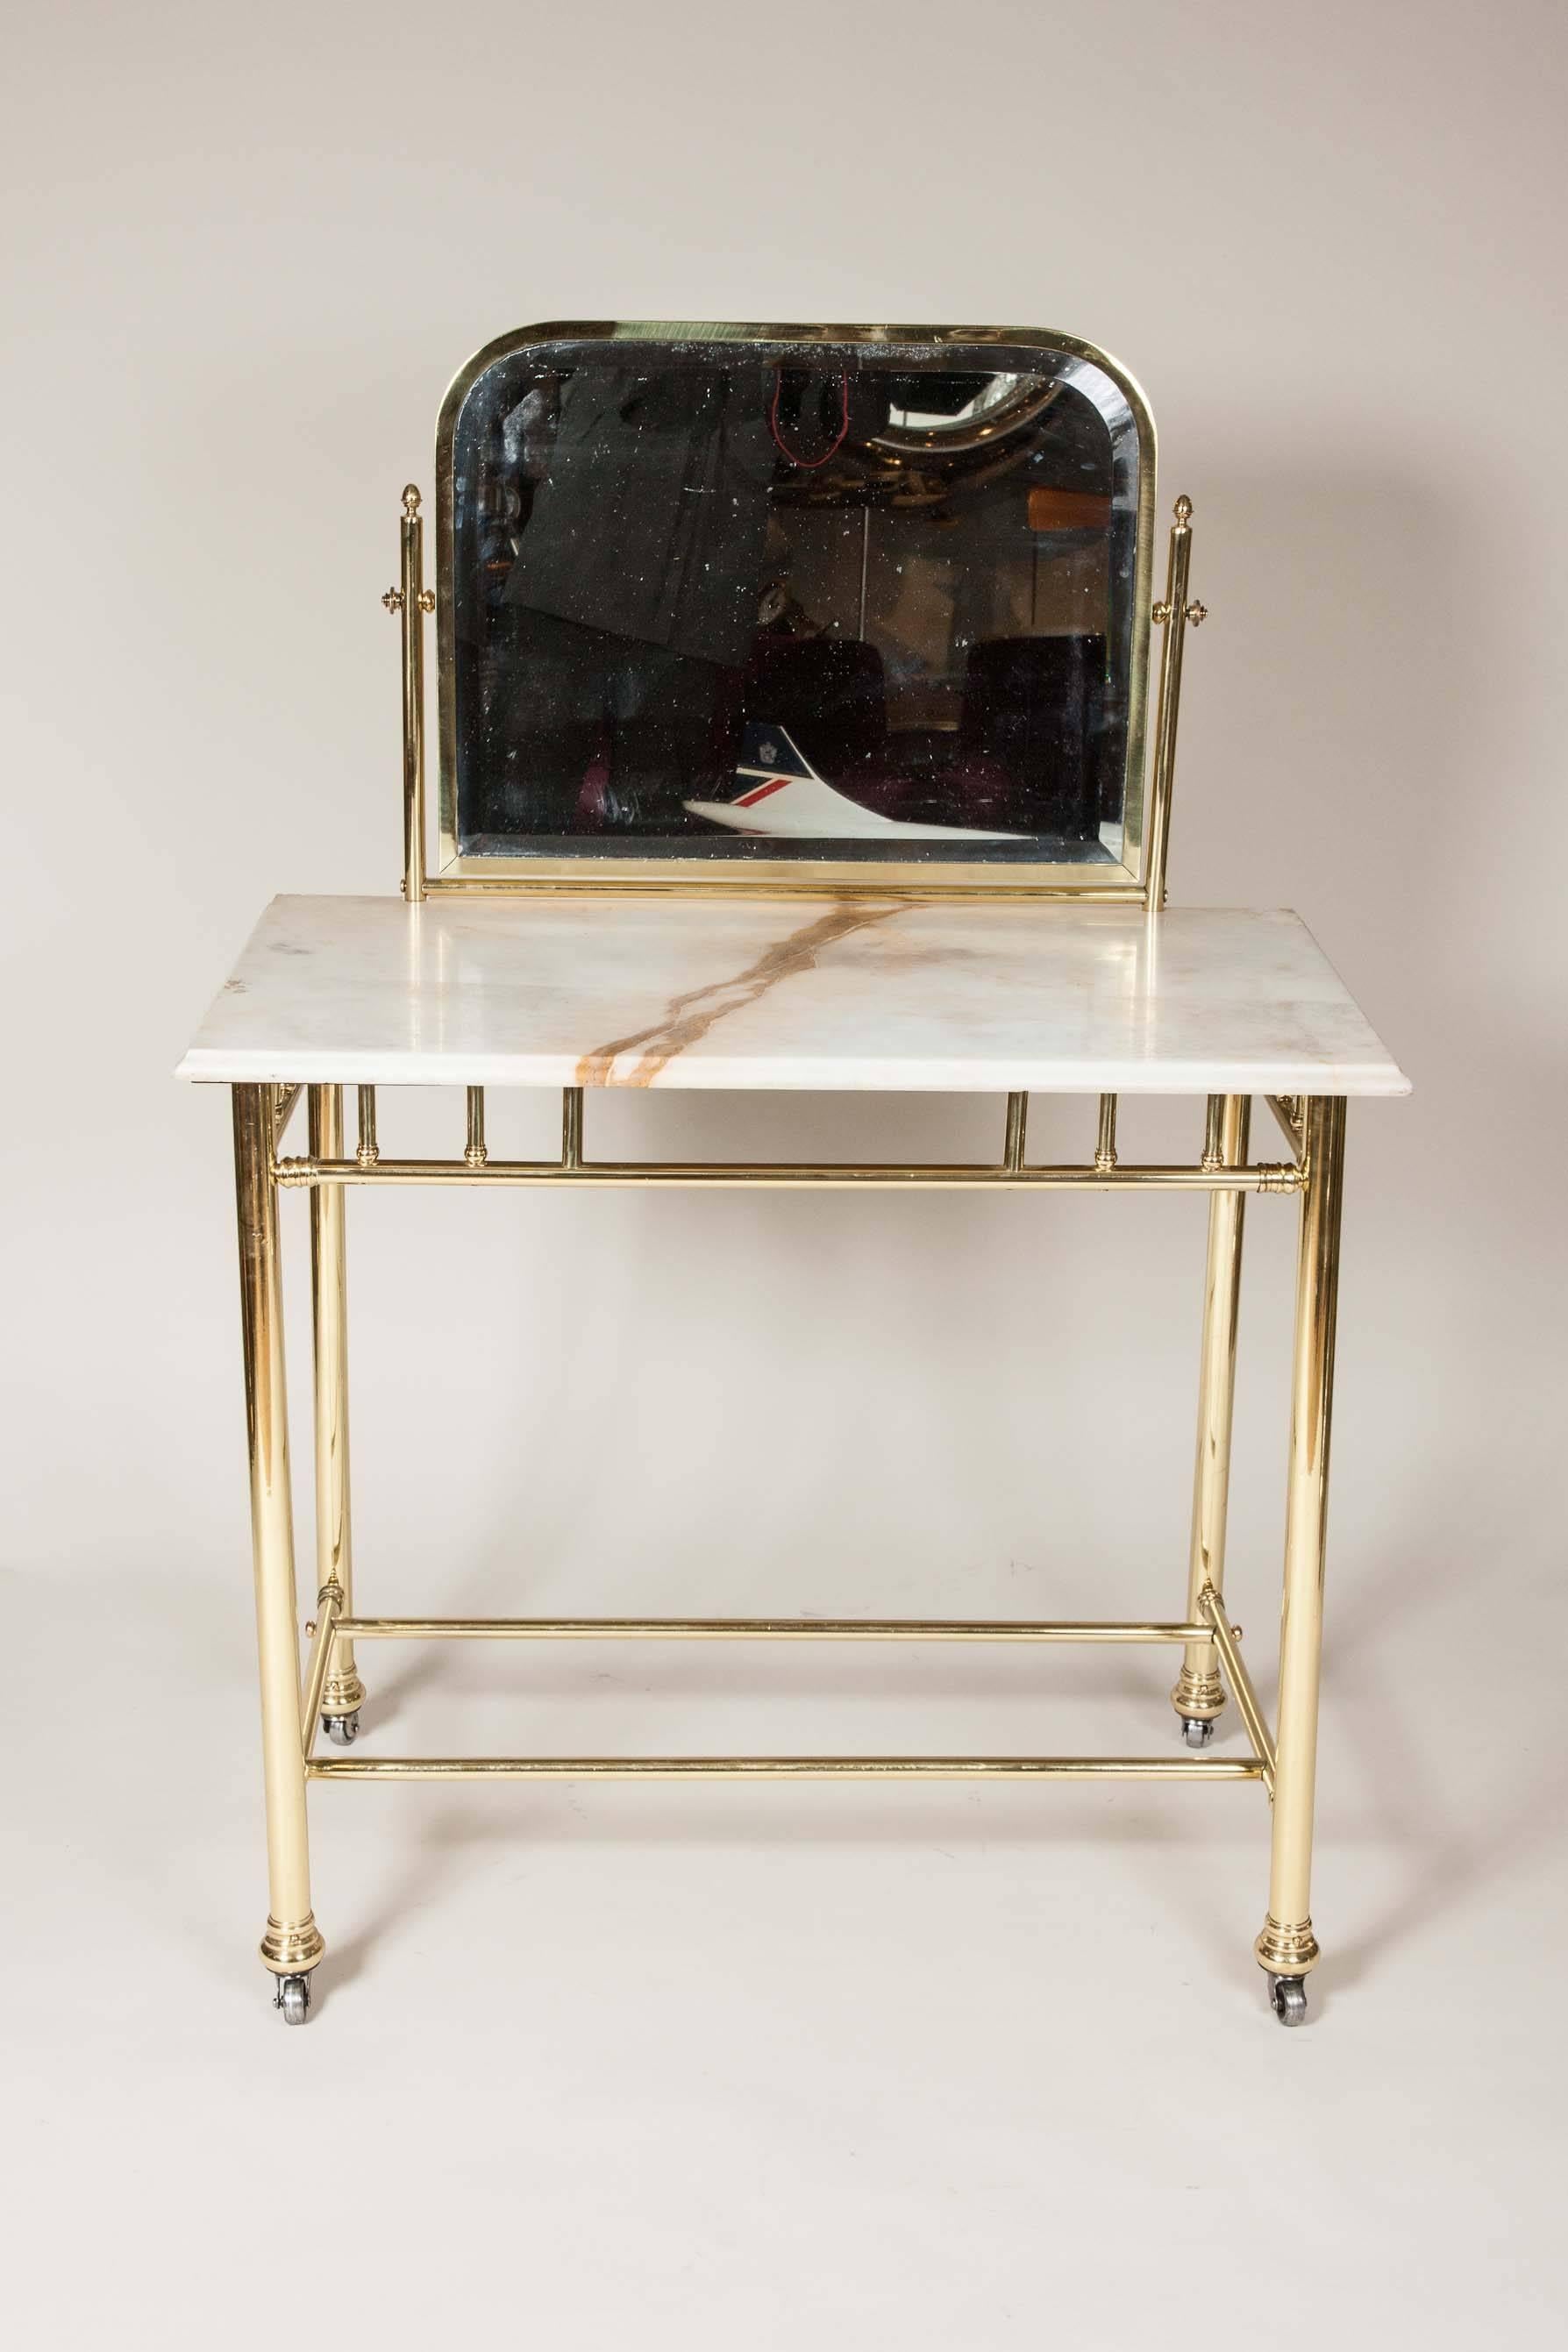 An Edwardian brass dressing table with tilting mirror and marble top.

